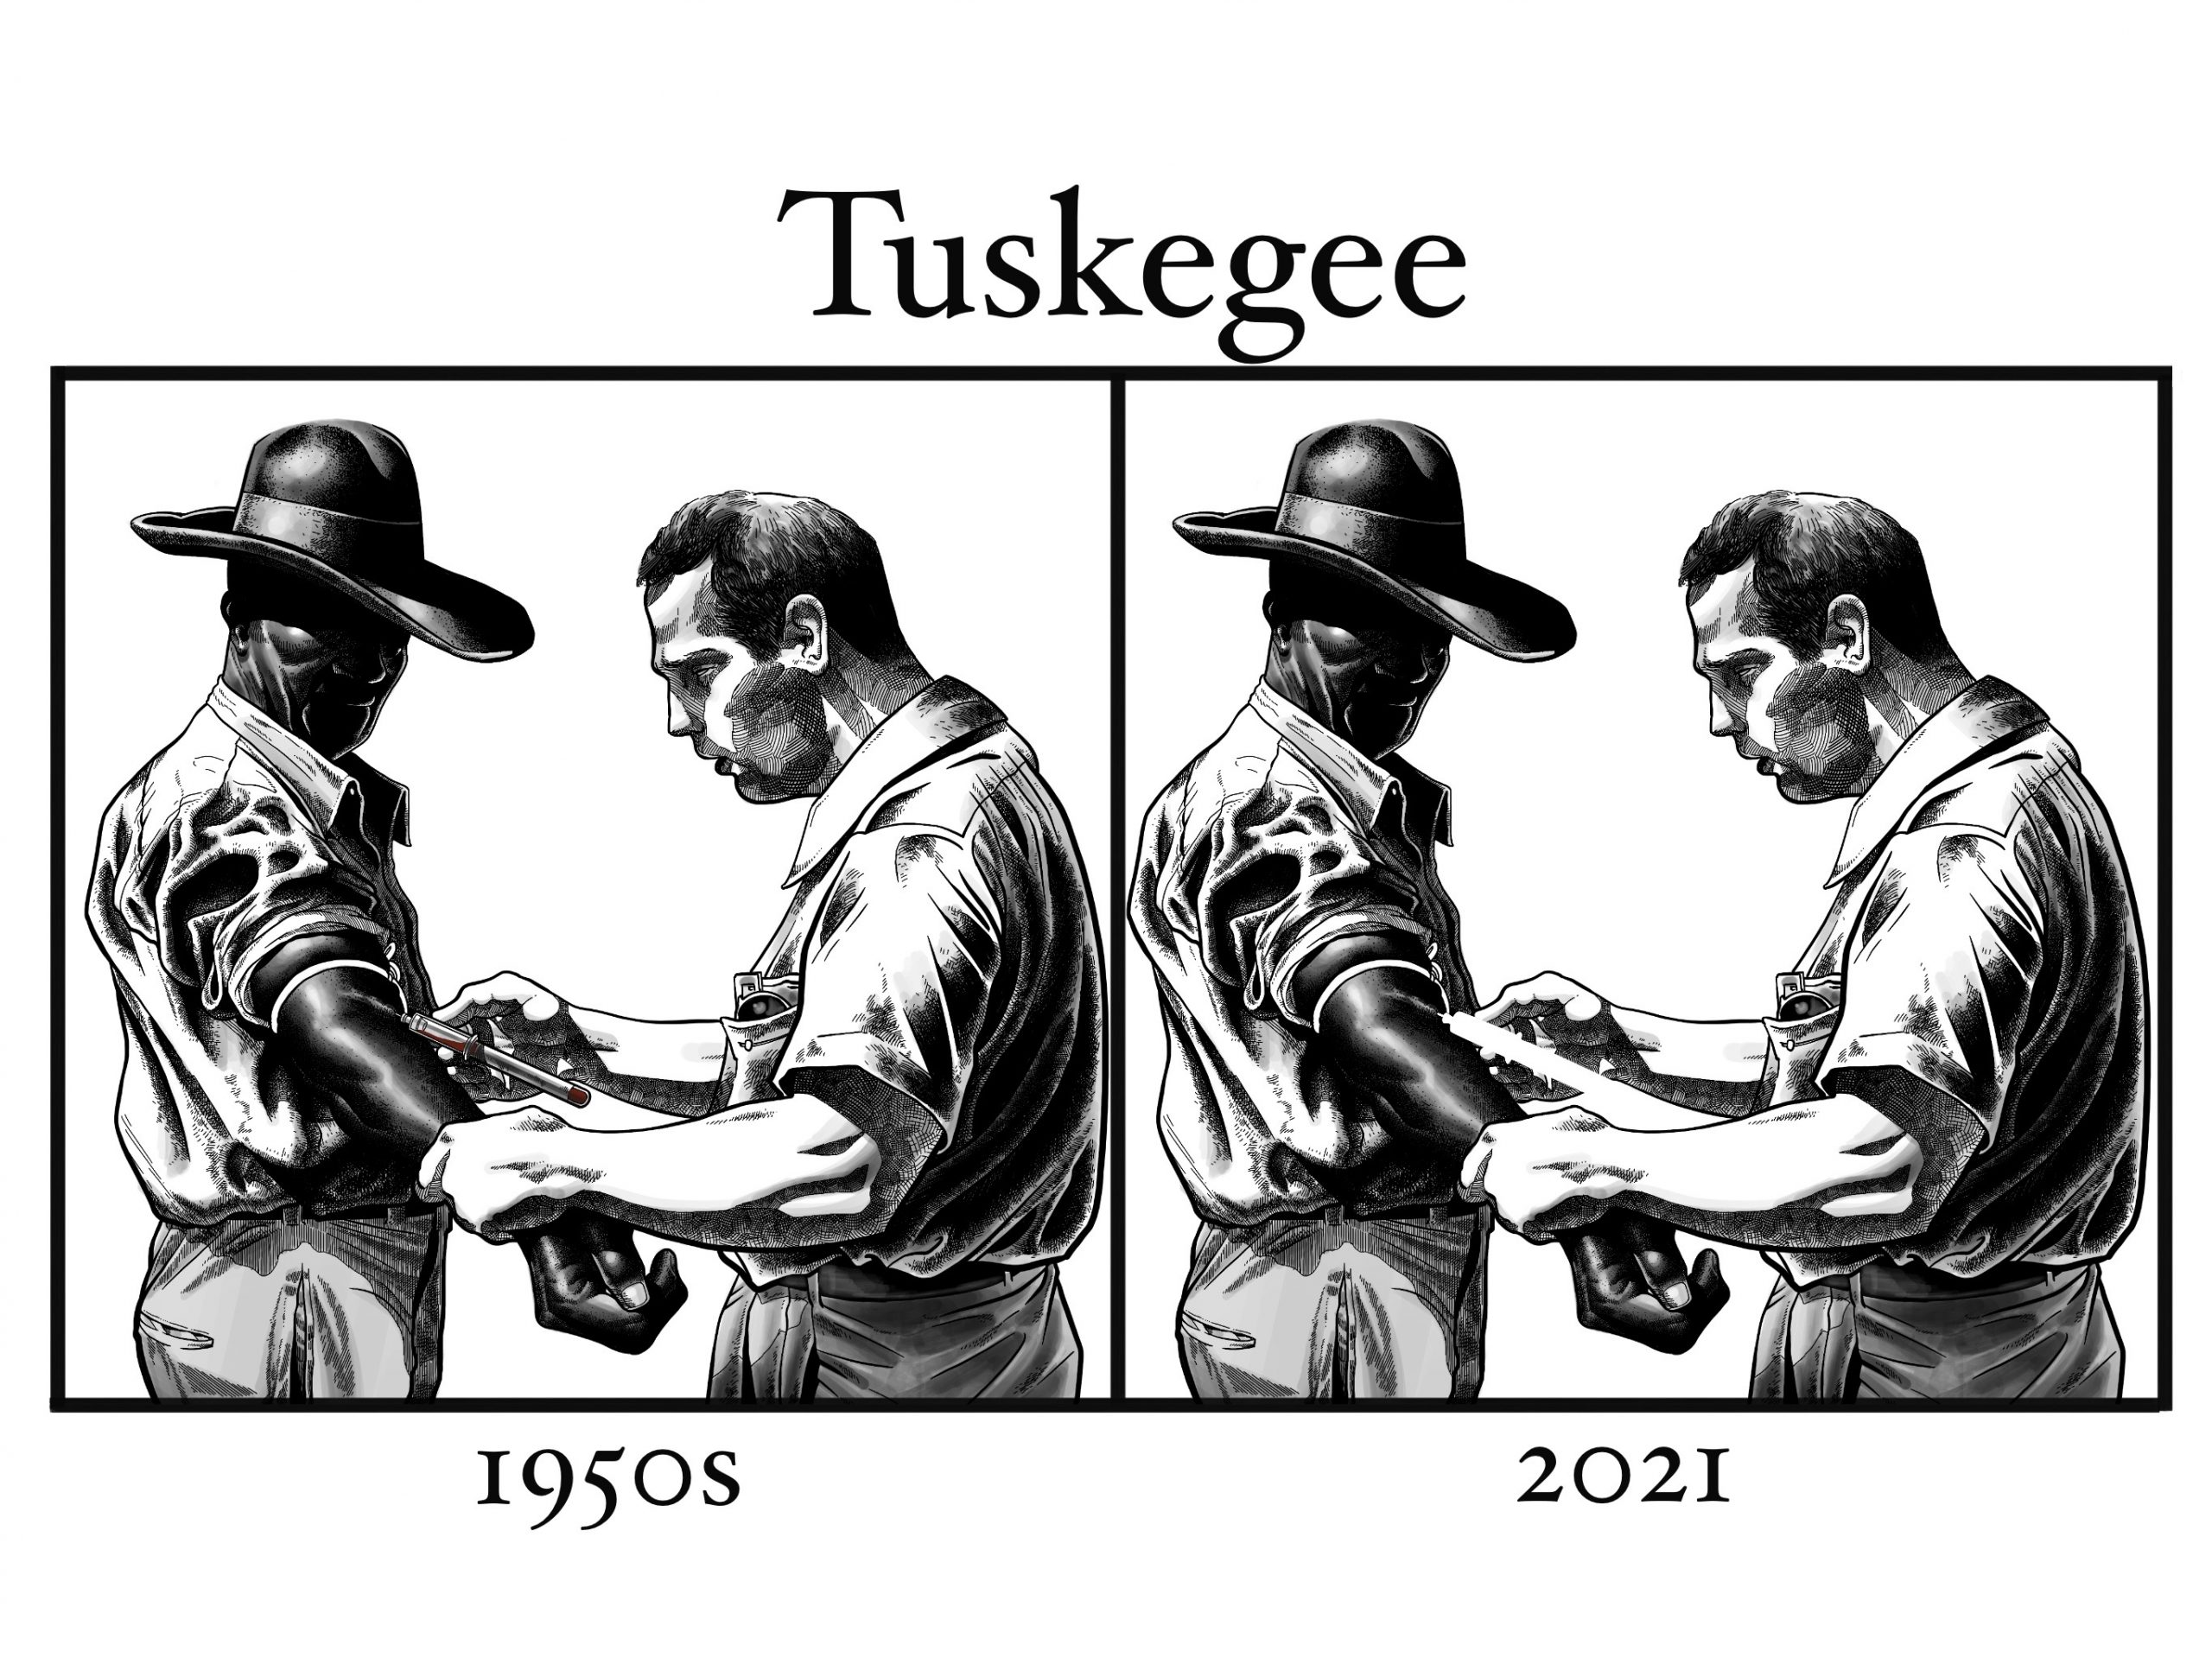 Tuskegee - Then and Now